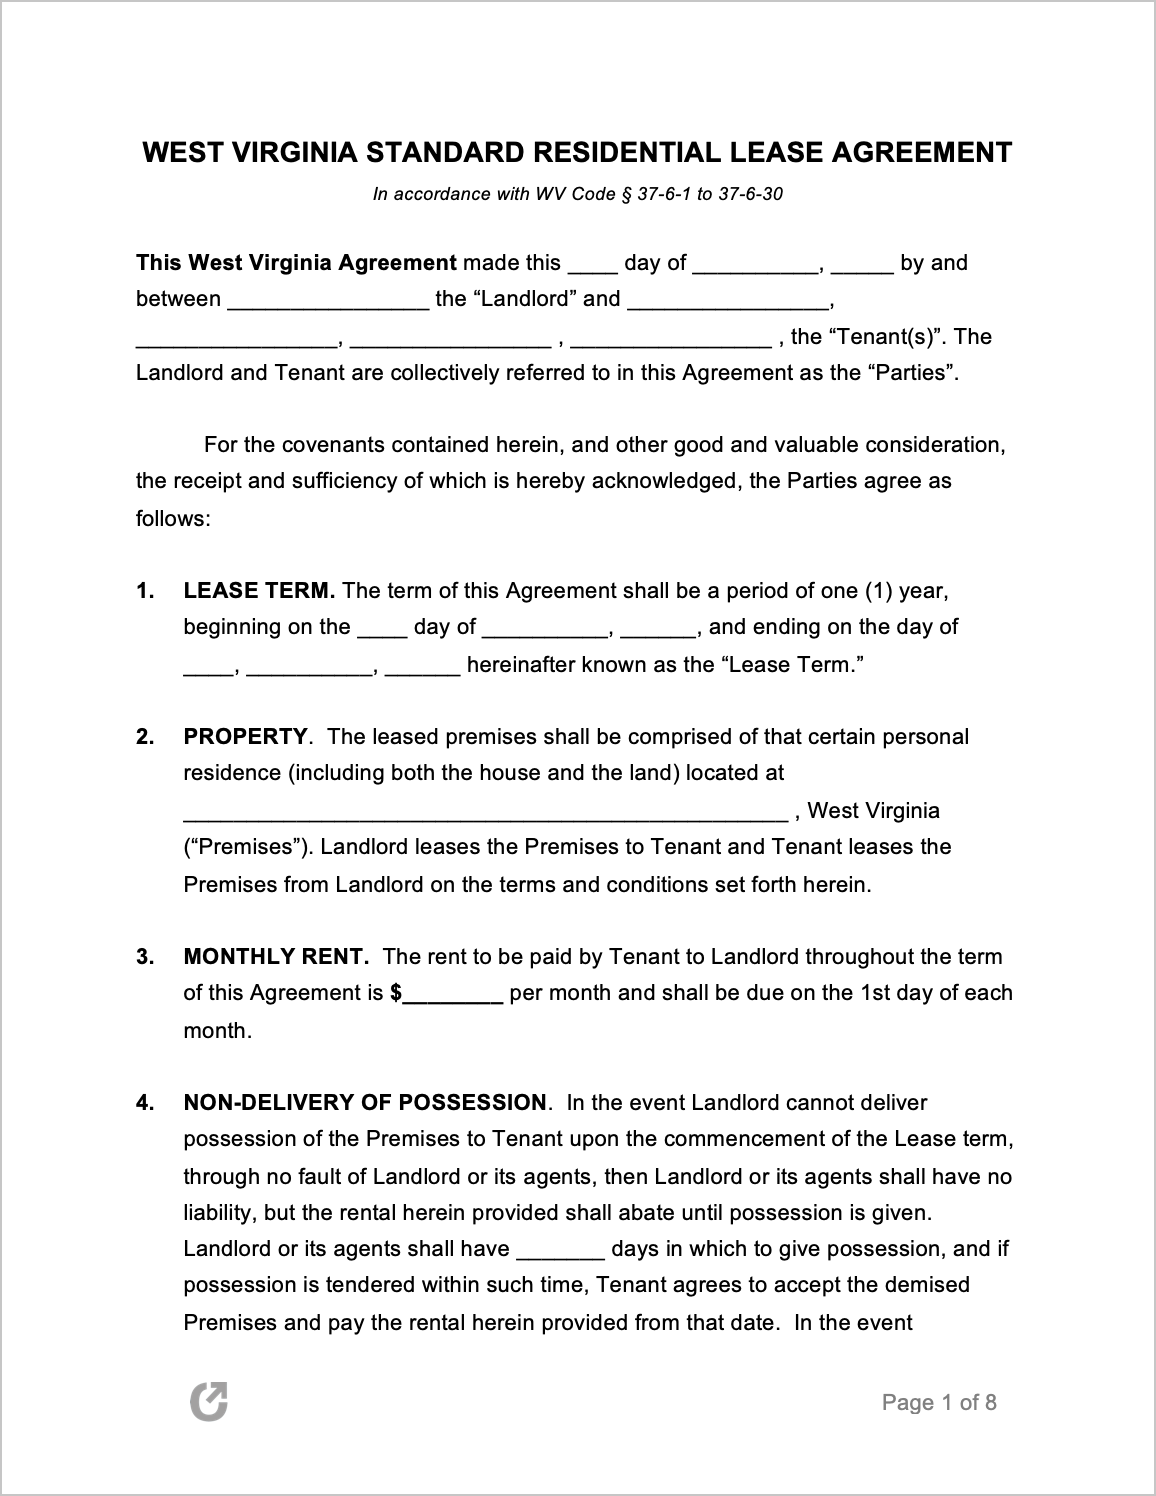 Free West Virginia Rental Lease Agreement Templates (23)  PDF  WORD For yearly rental agreement template